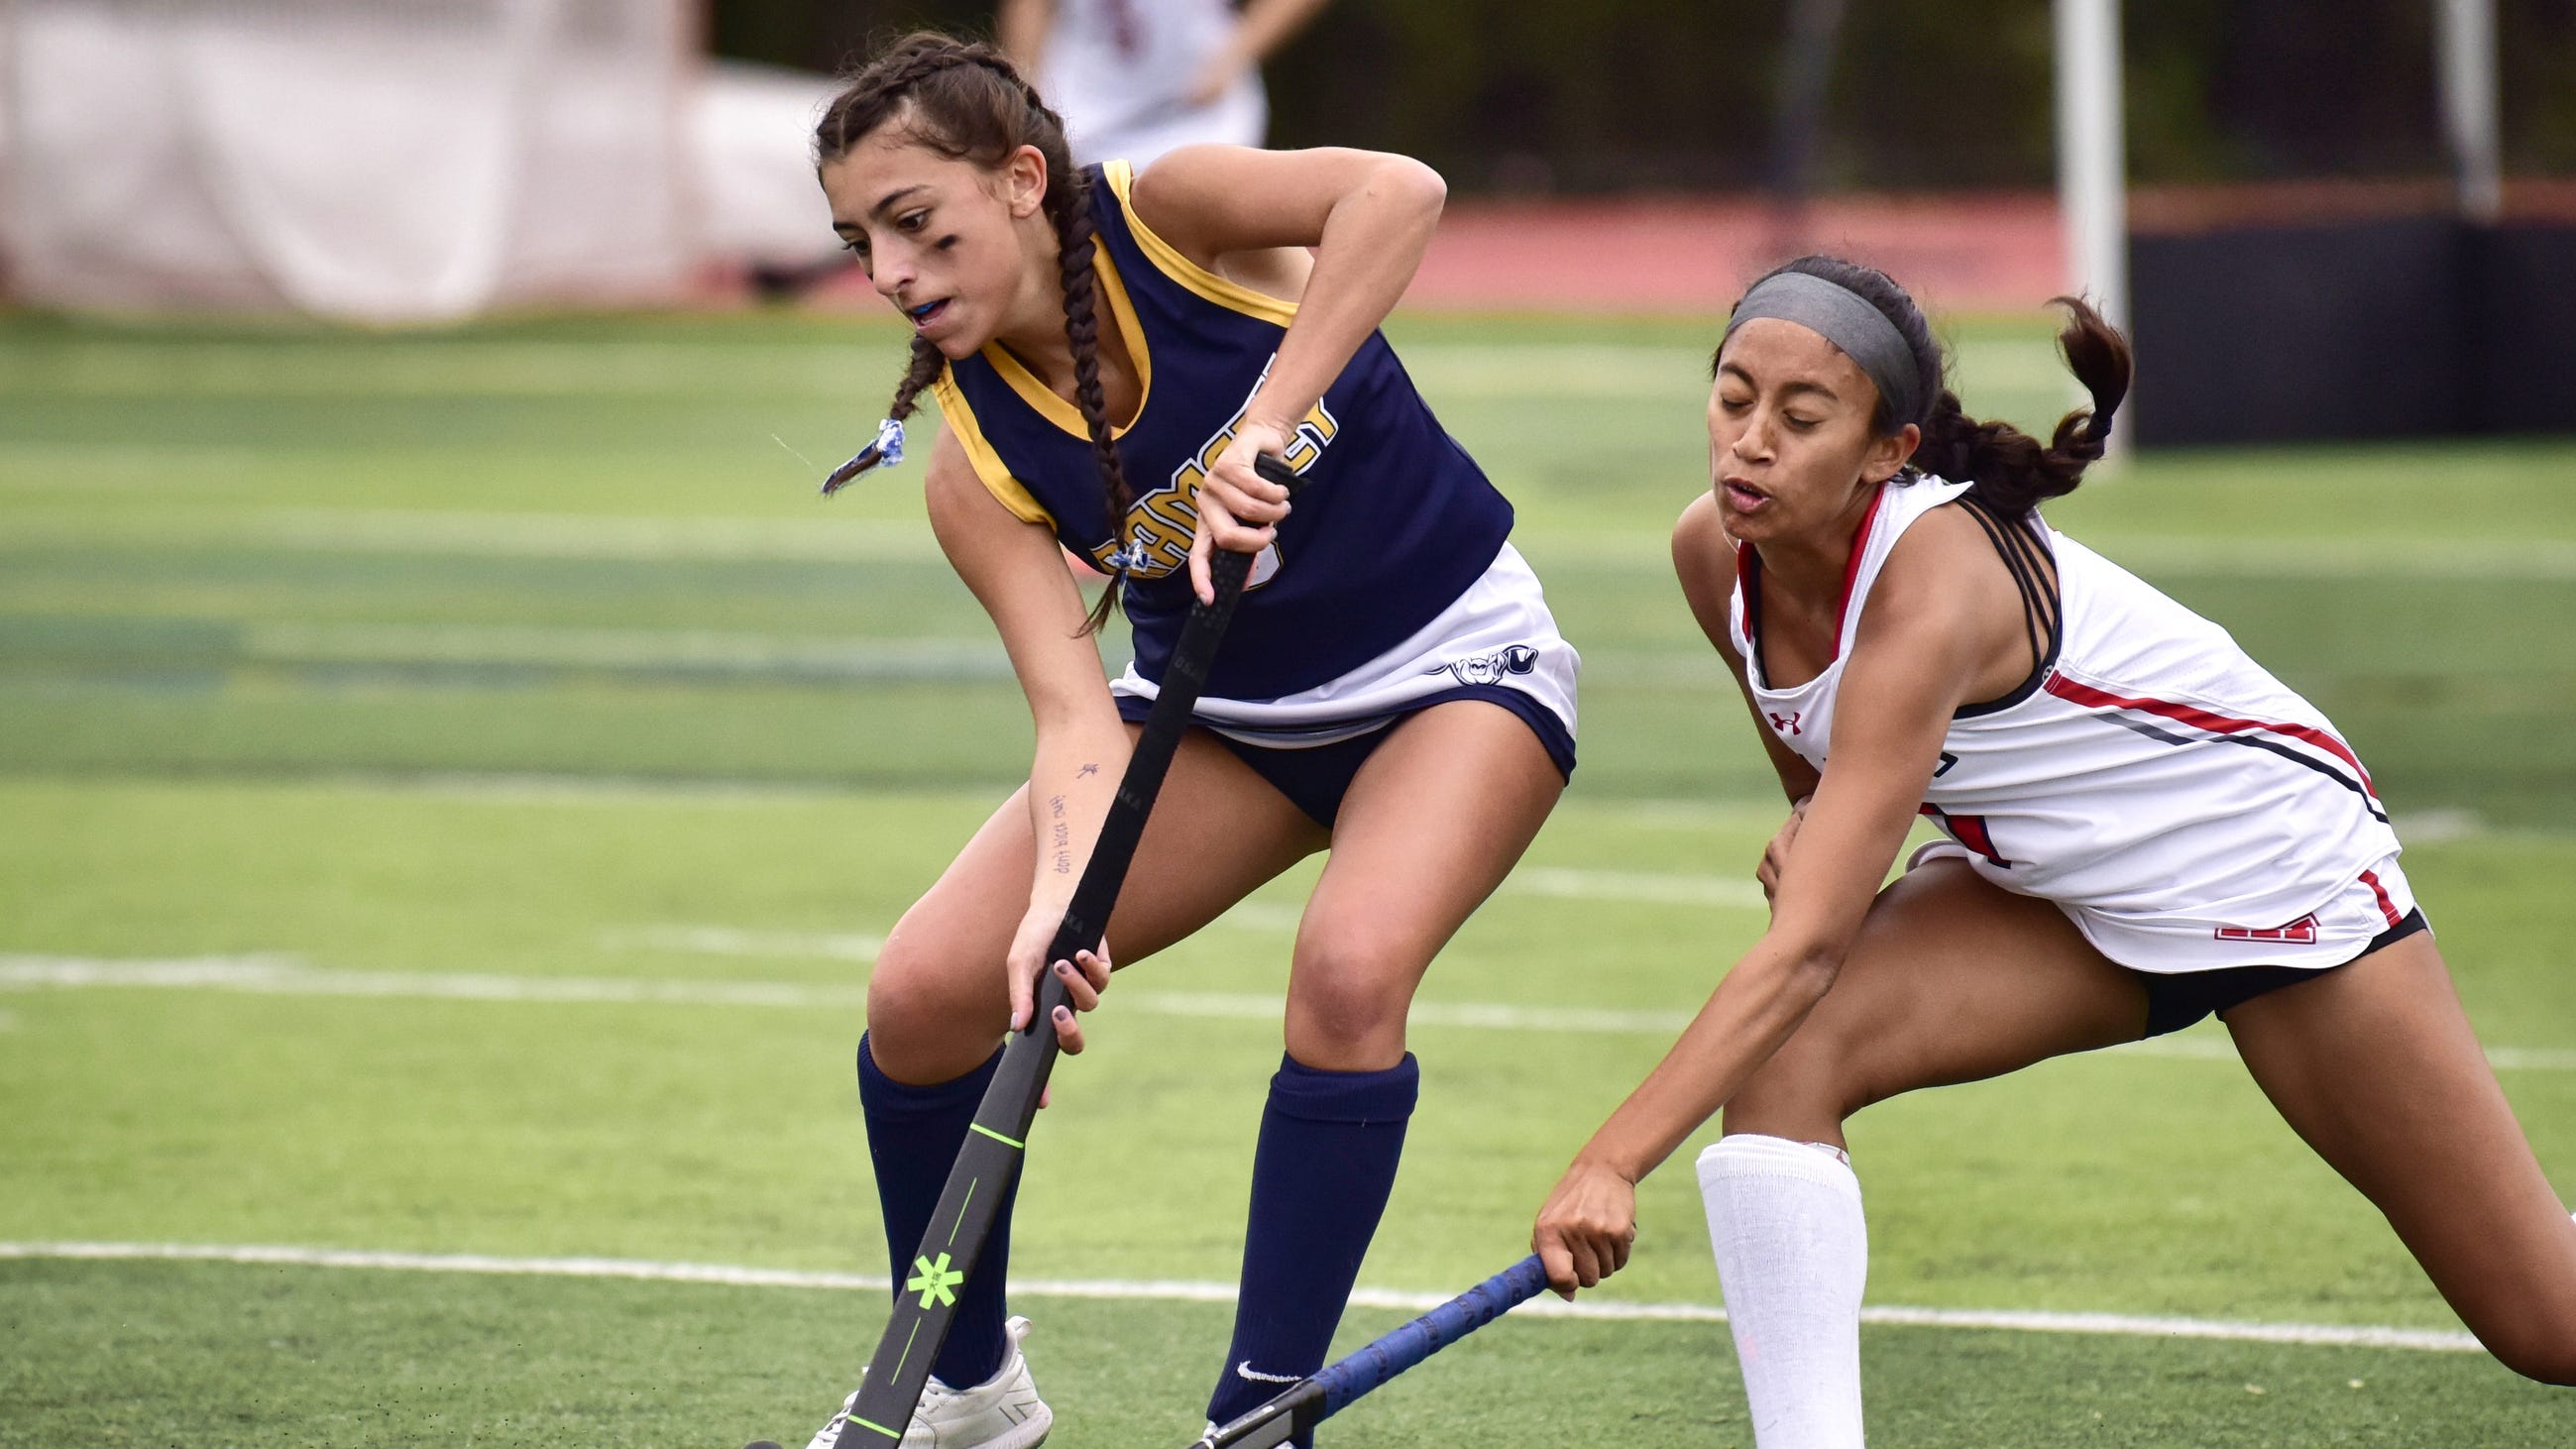 NJ field hockey Here are the 2022 state playoff brackets